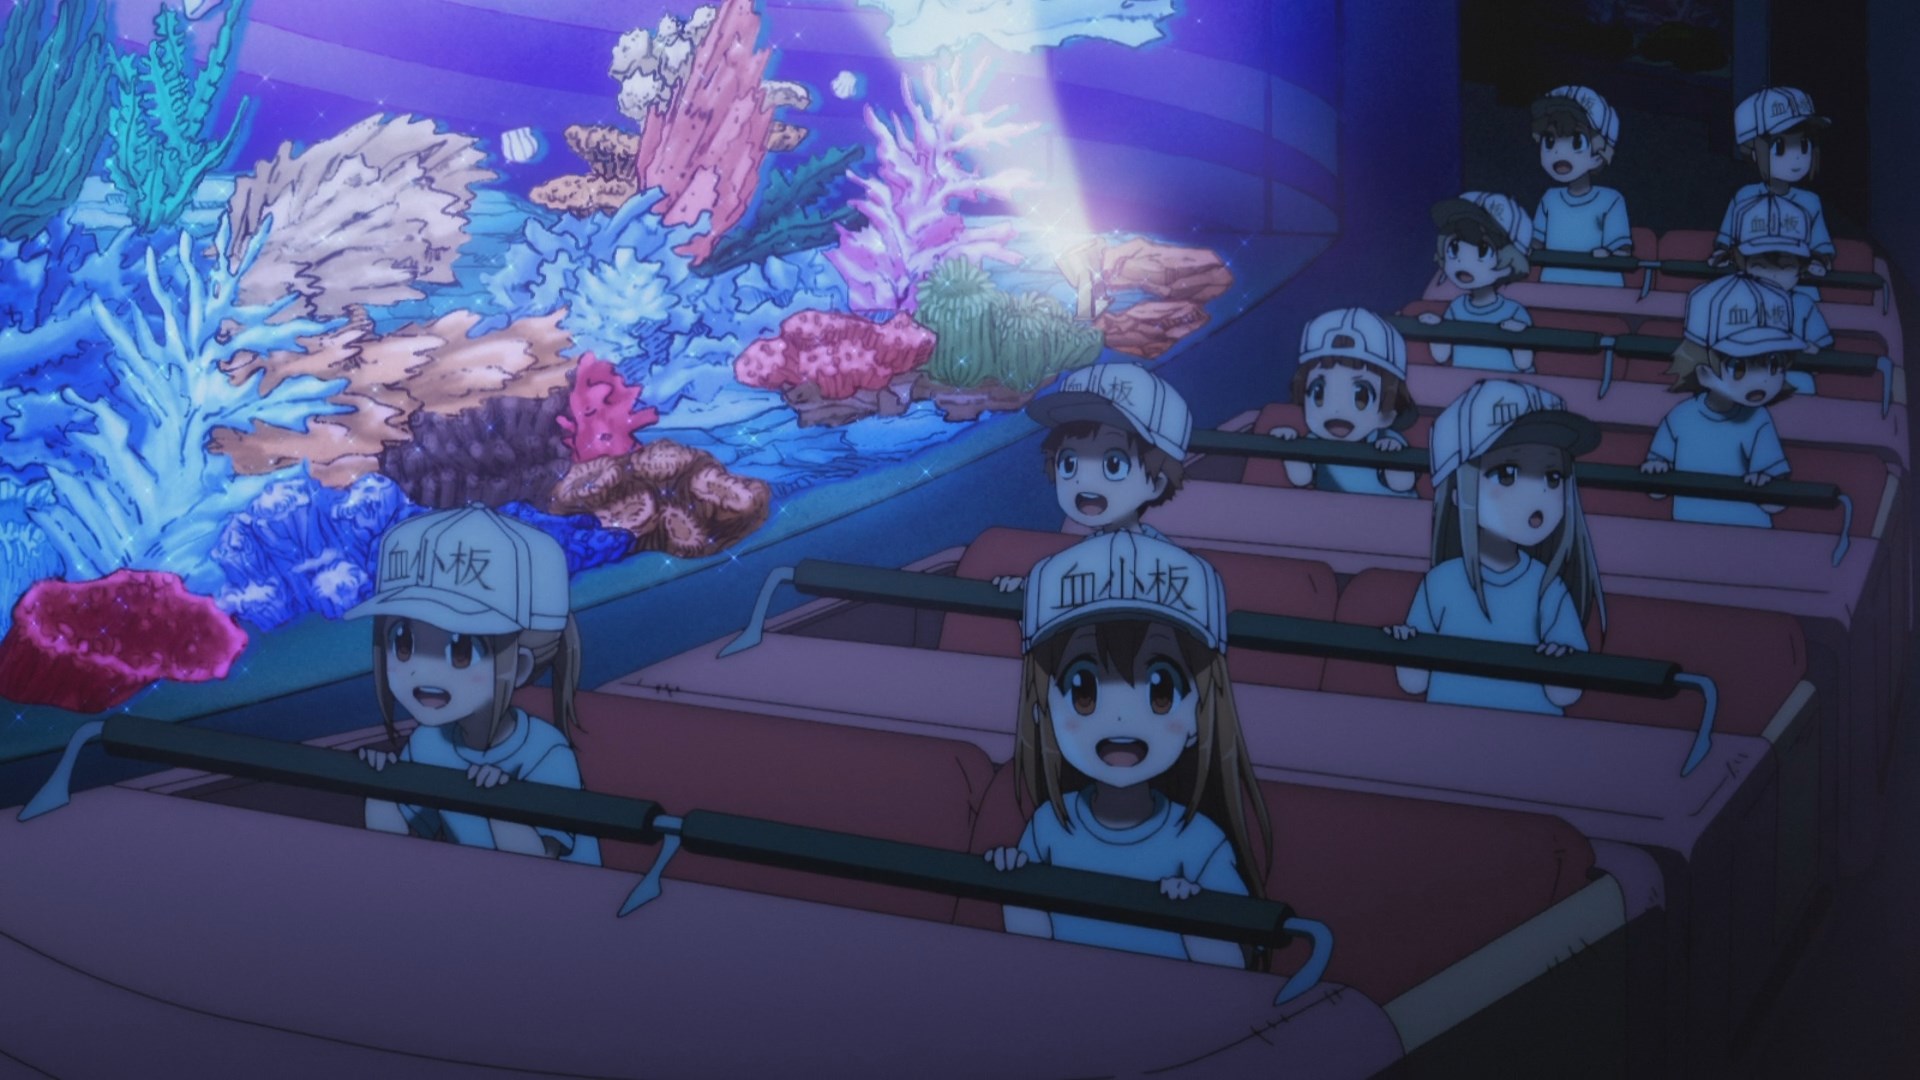 Cells At Work! Episode 1 First Impression Review – 「The Only Shinyuu Site」